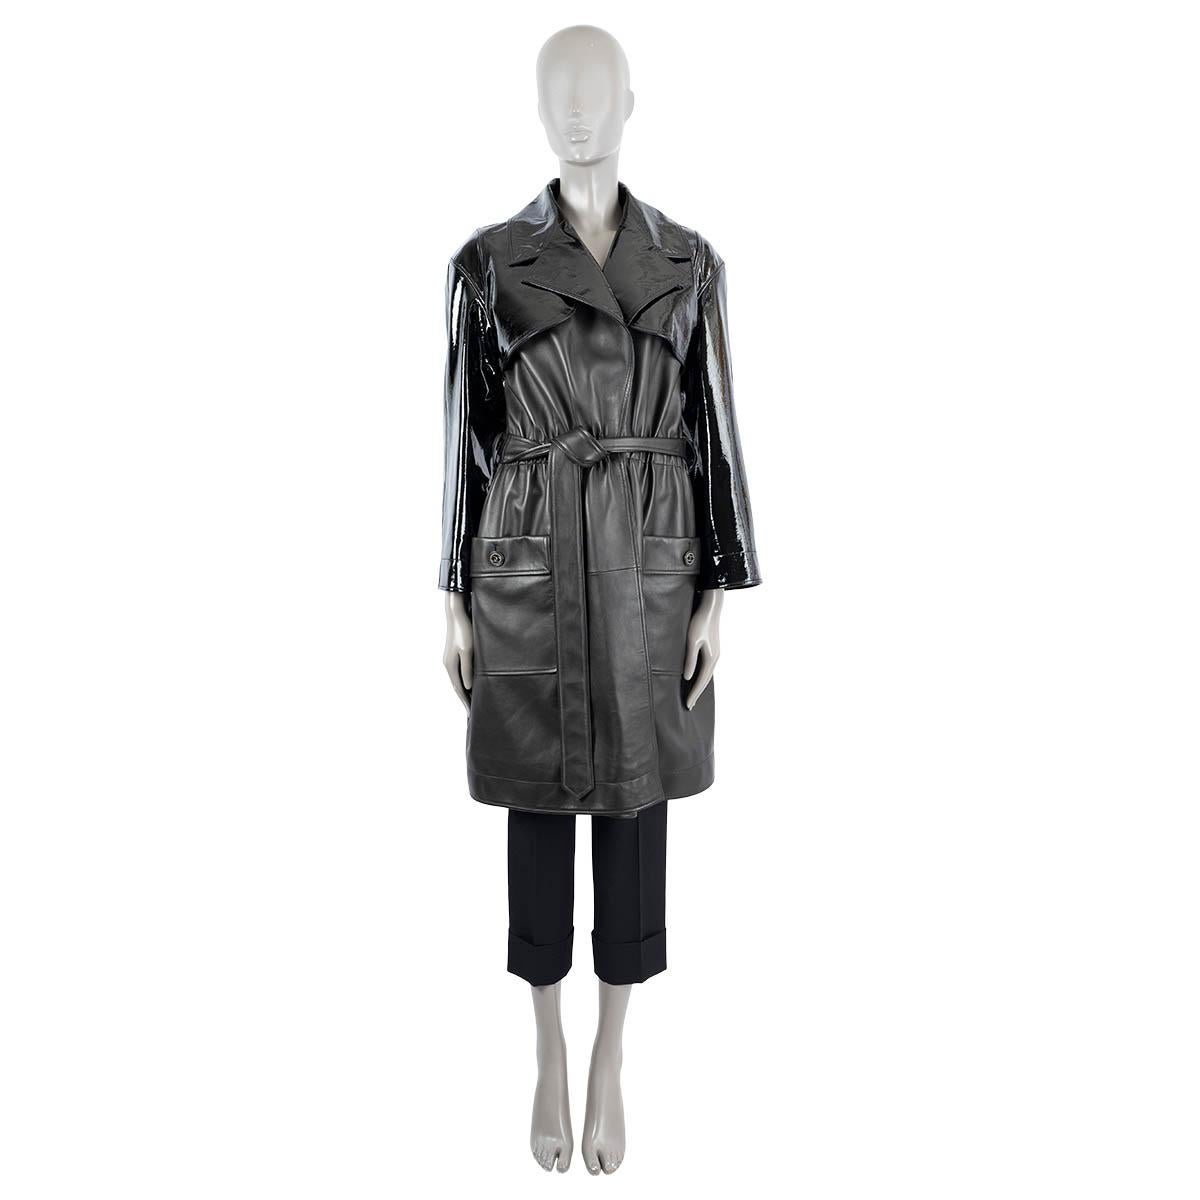 100% authentic Chanel trench coat in black leather with patent leather top. Features two patch pockets with additional flap pocket on the front and features an elastic waistband. Closes with a belt. Has been worn once or twice and is in virtually